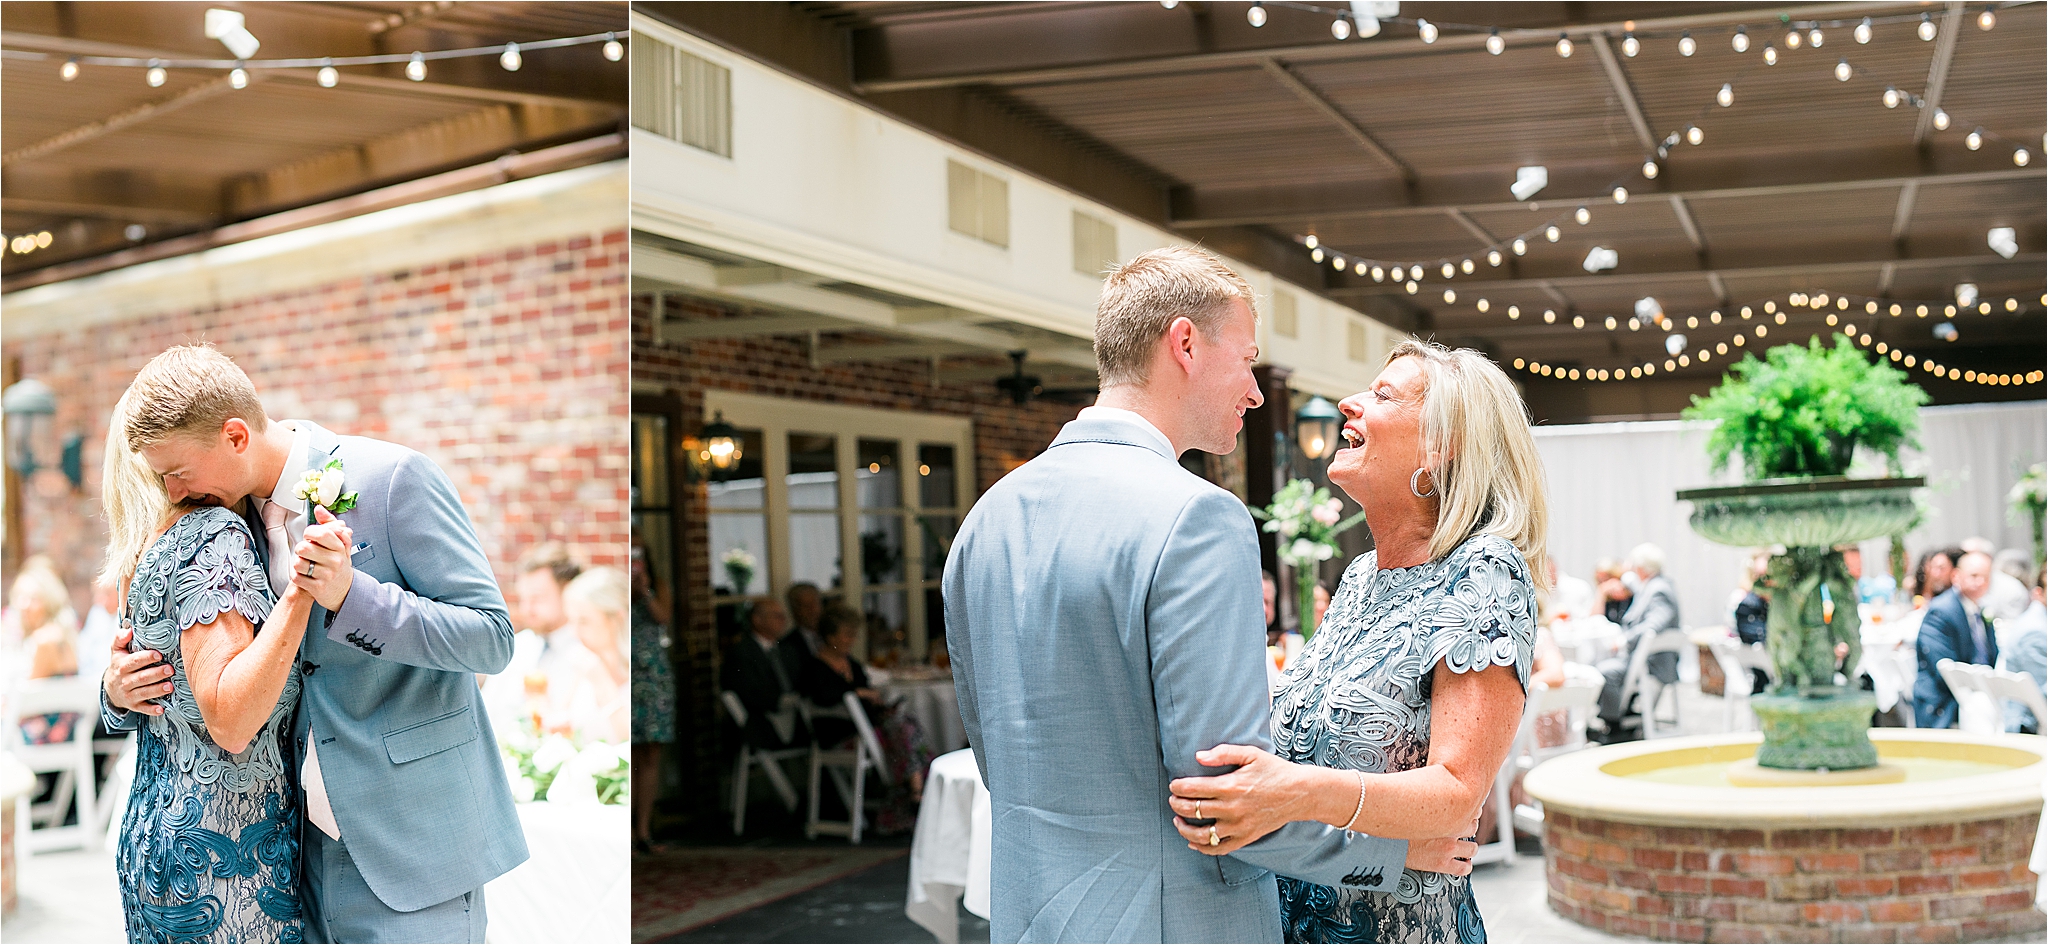 A groom and his mother share a dance during a Three Forks Dallas Wedding Reception 